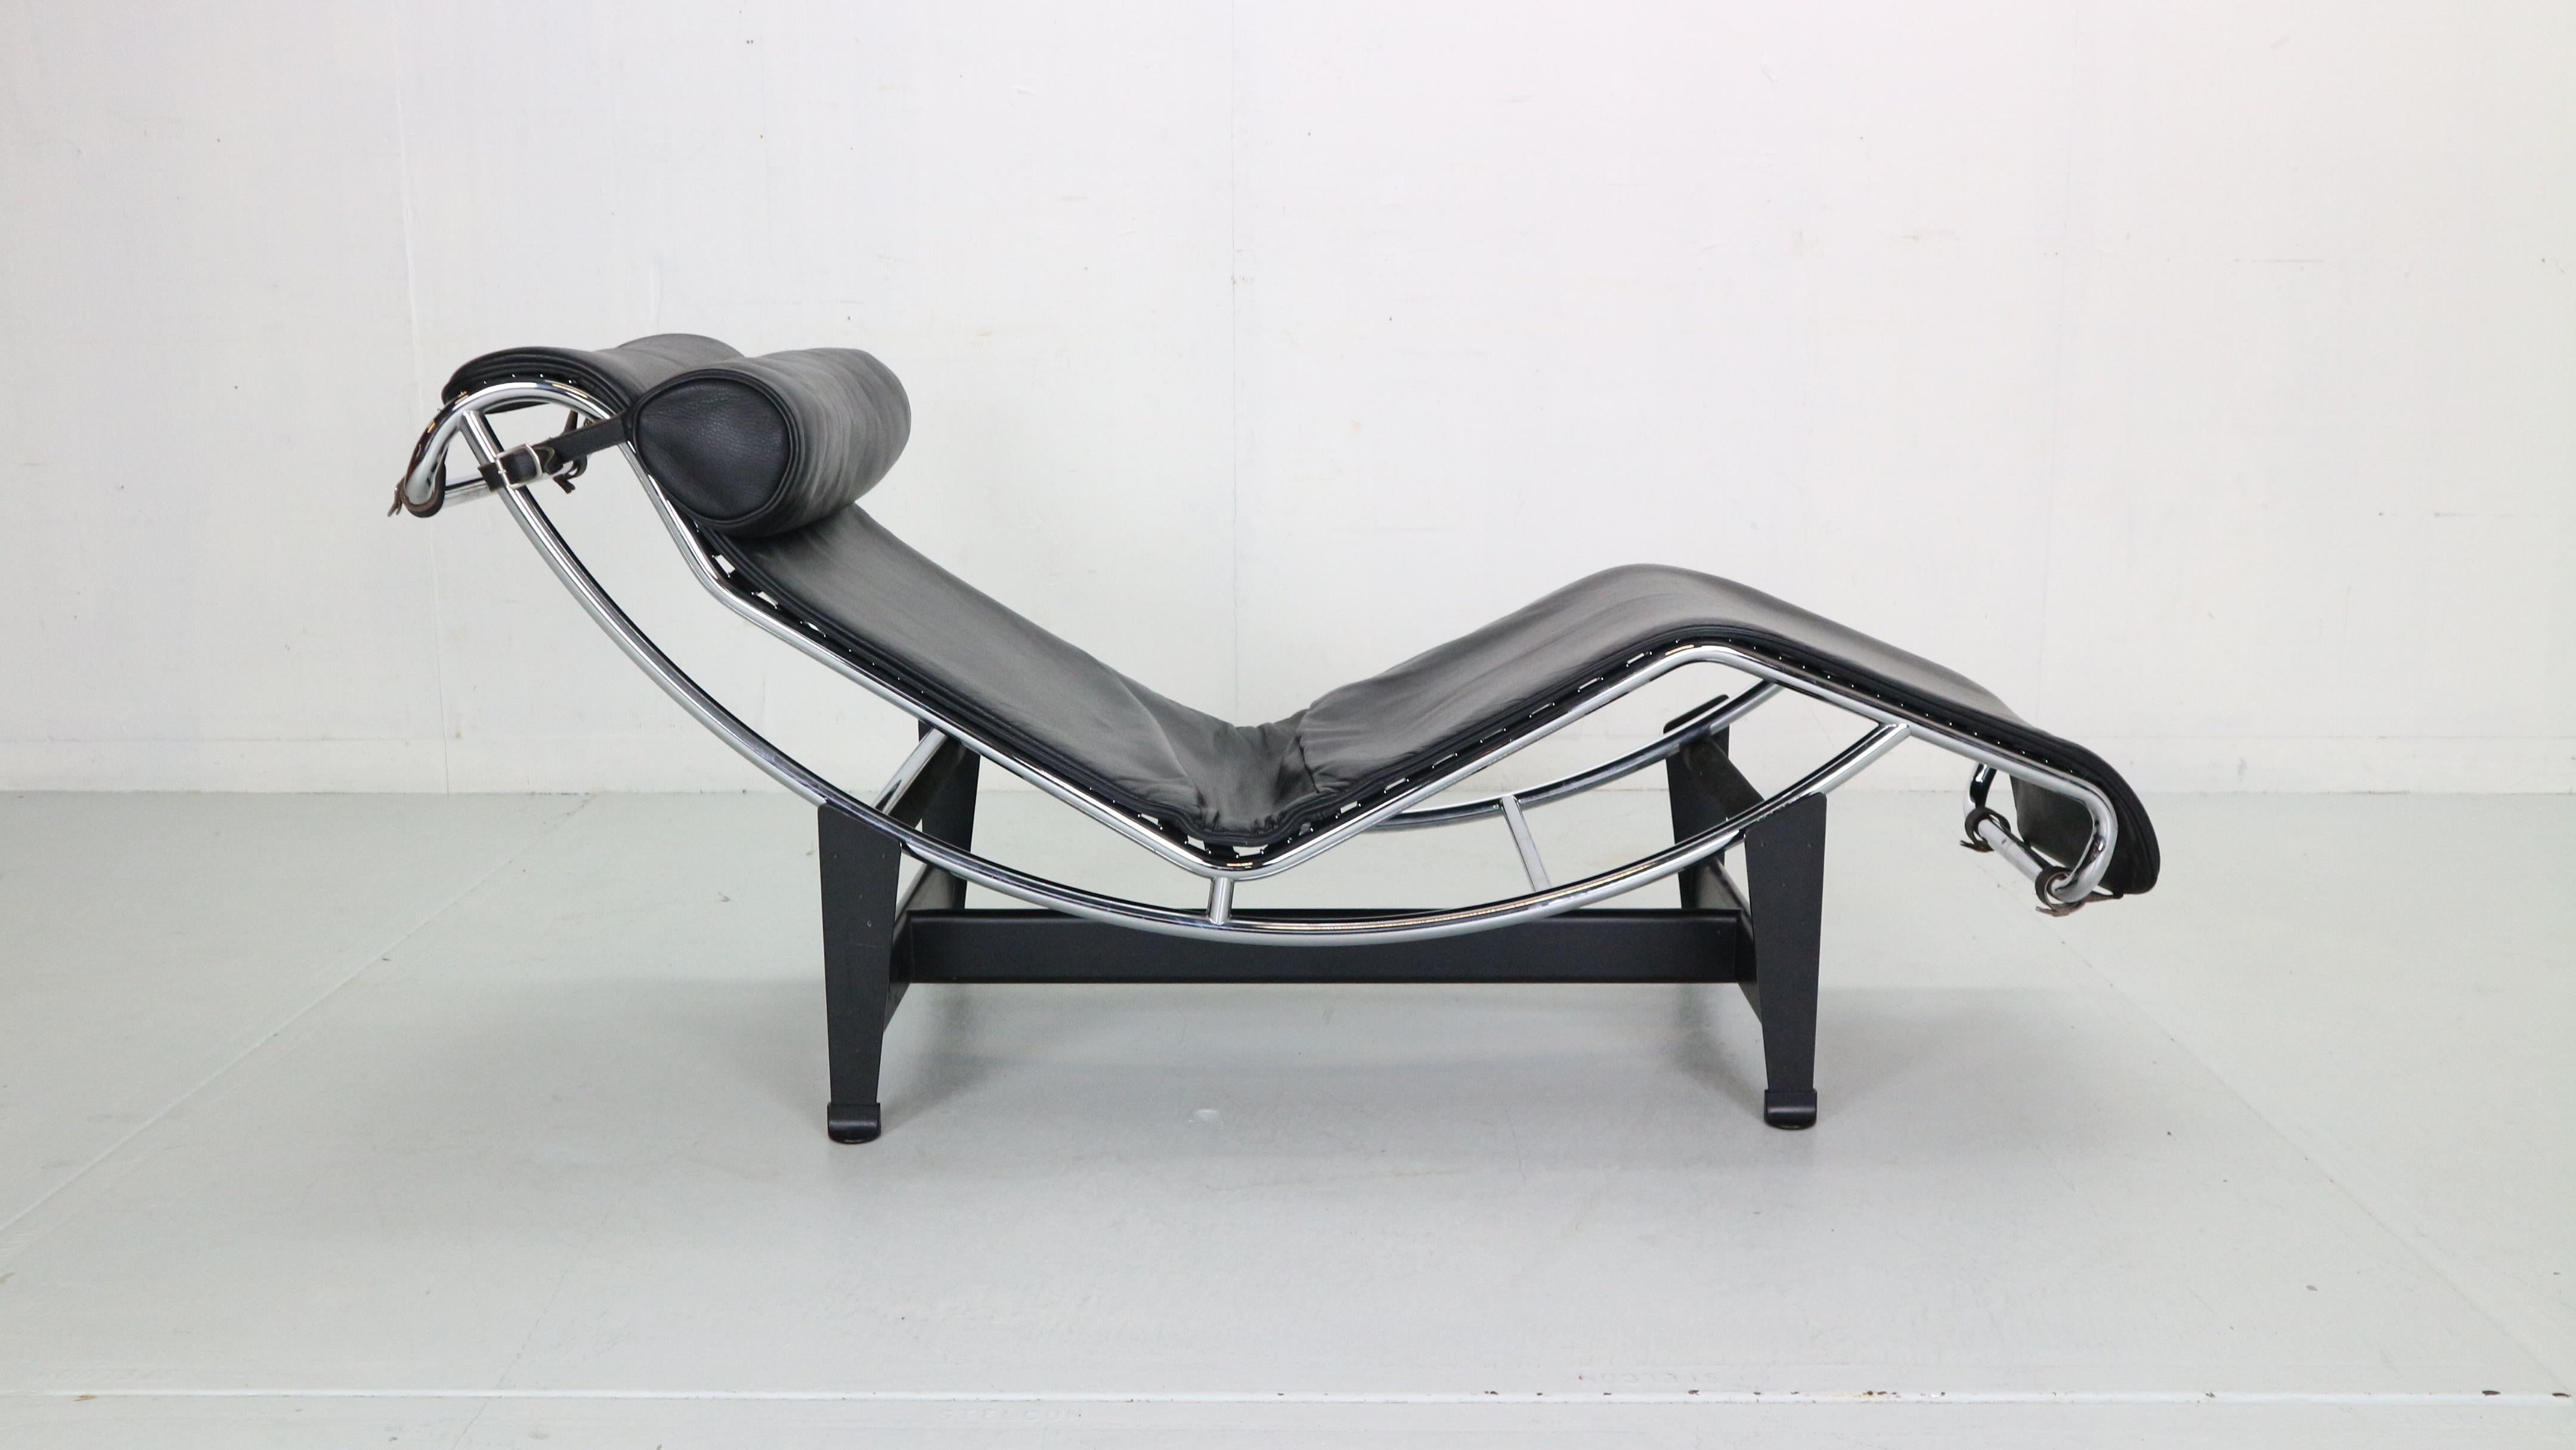 Designed by Le Corbusier, Pierre Jeanneret and Charlotte Perriand in 1928 and made famous since 1965 by Cassina. 
LC4 is a chaise lounge with variable inclination with cradle in polished chromed steel and pedestal in black painted steel.
Mattress